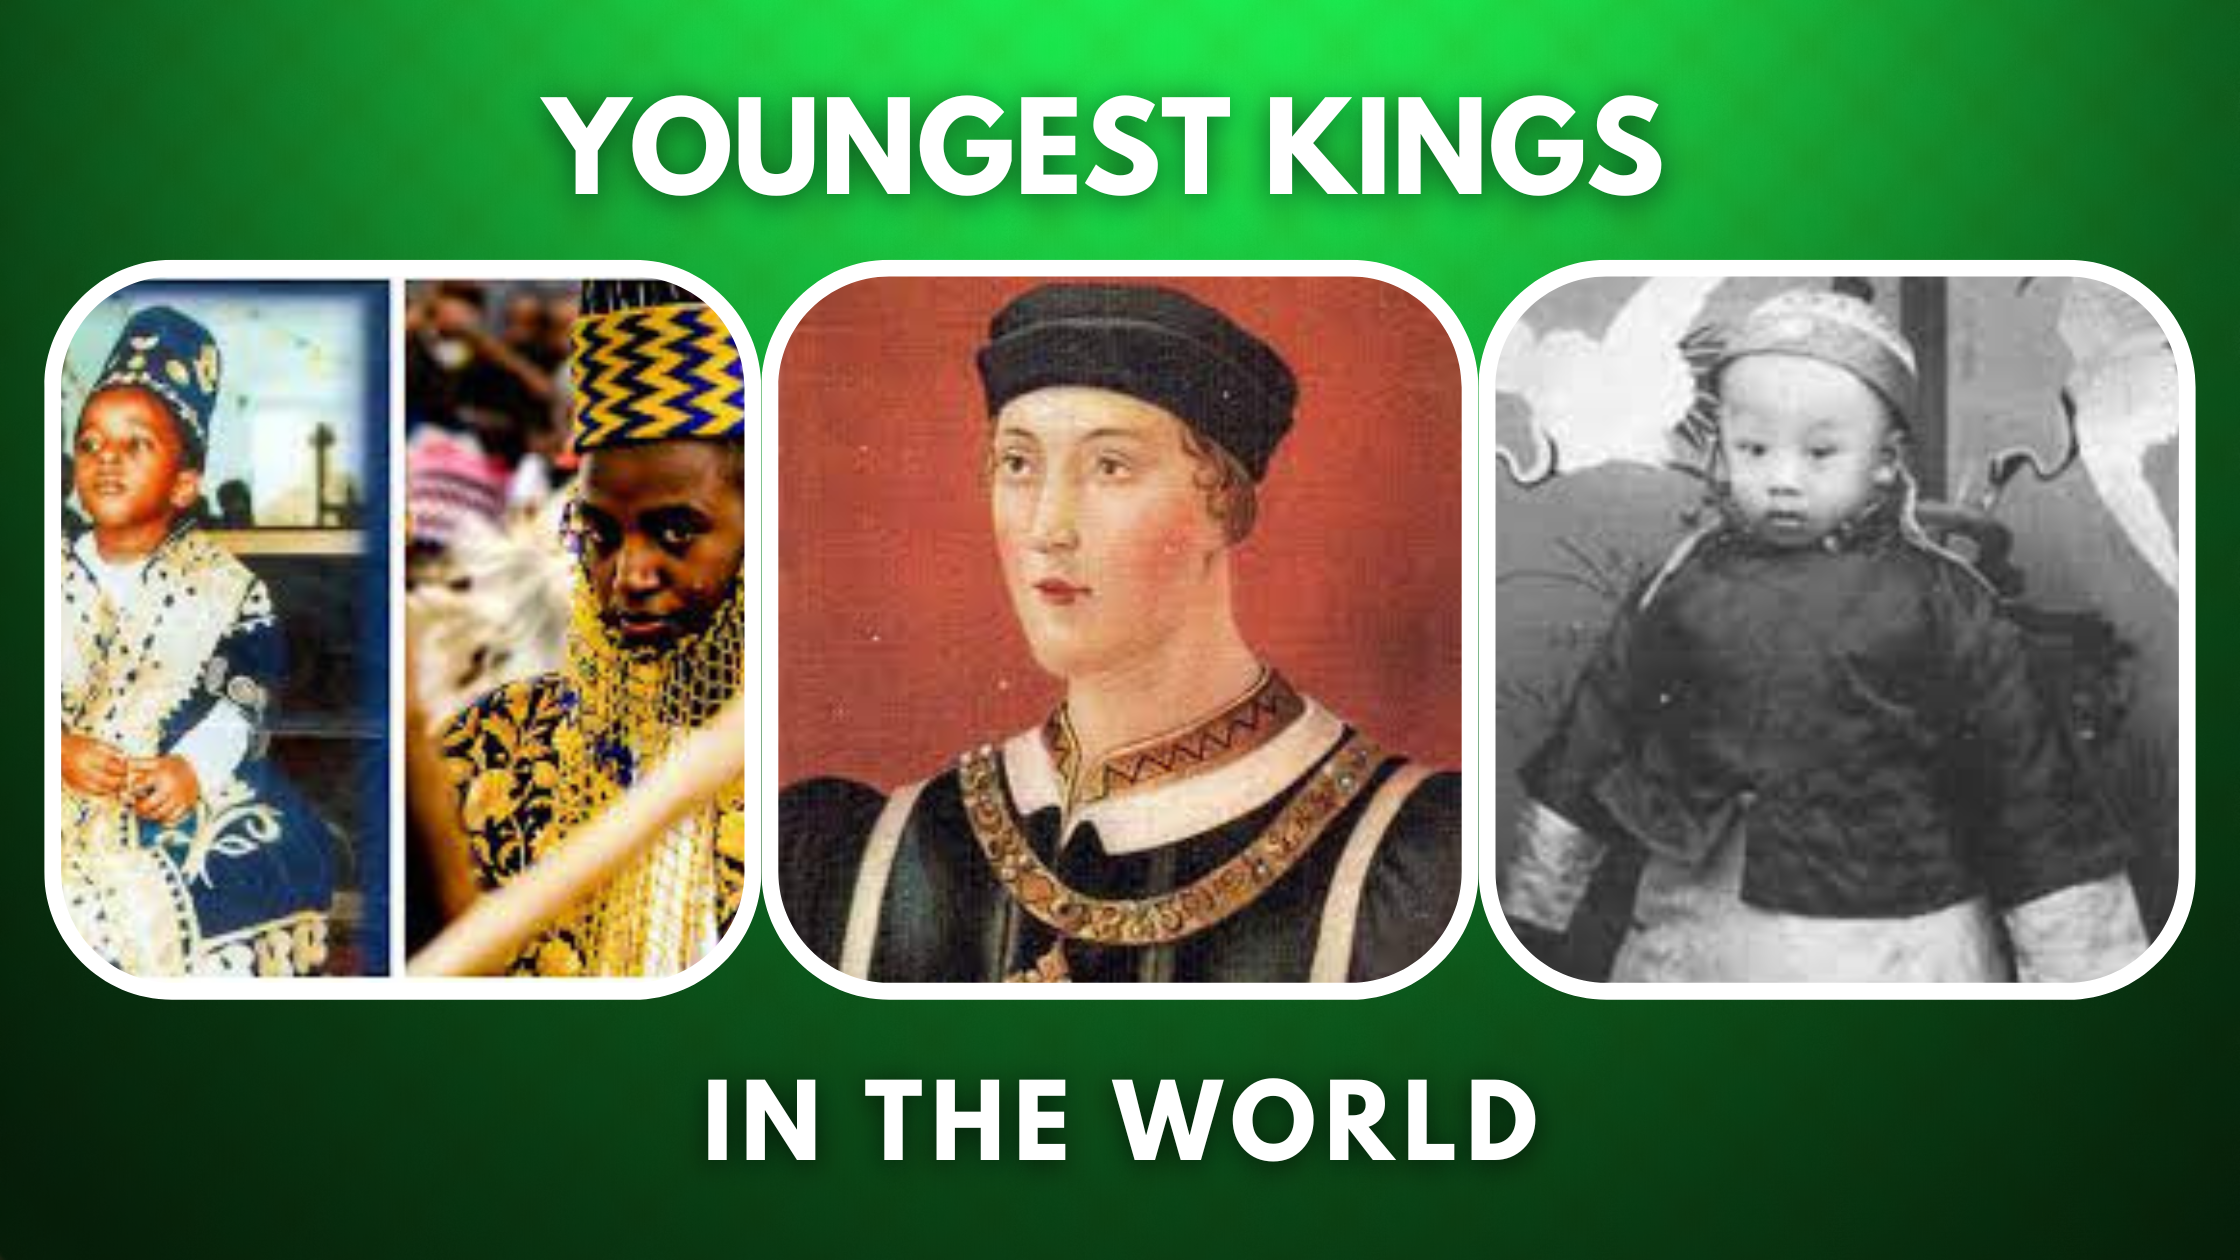 List of Top 10 Youngest Kings in the World